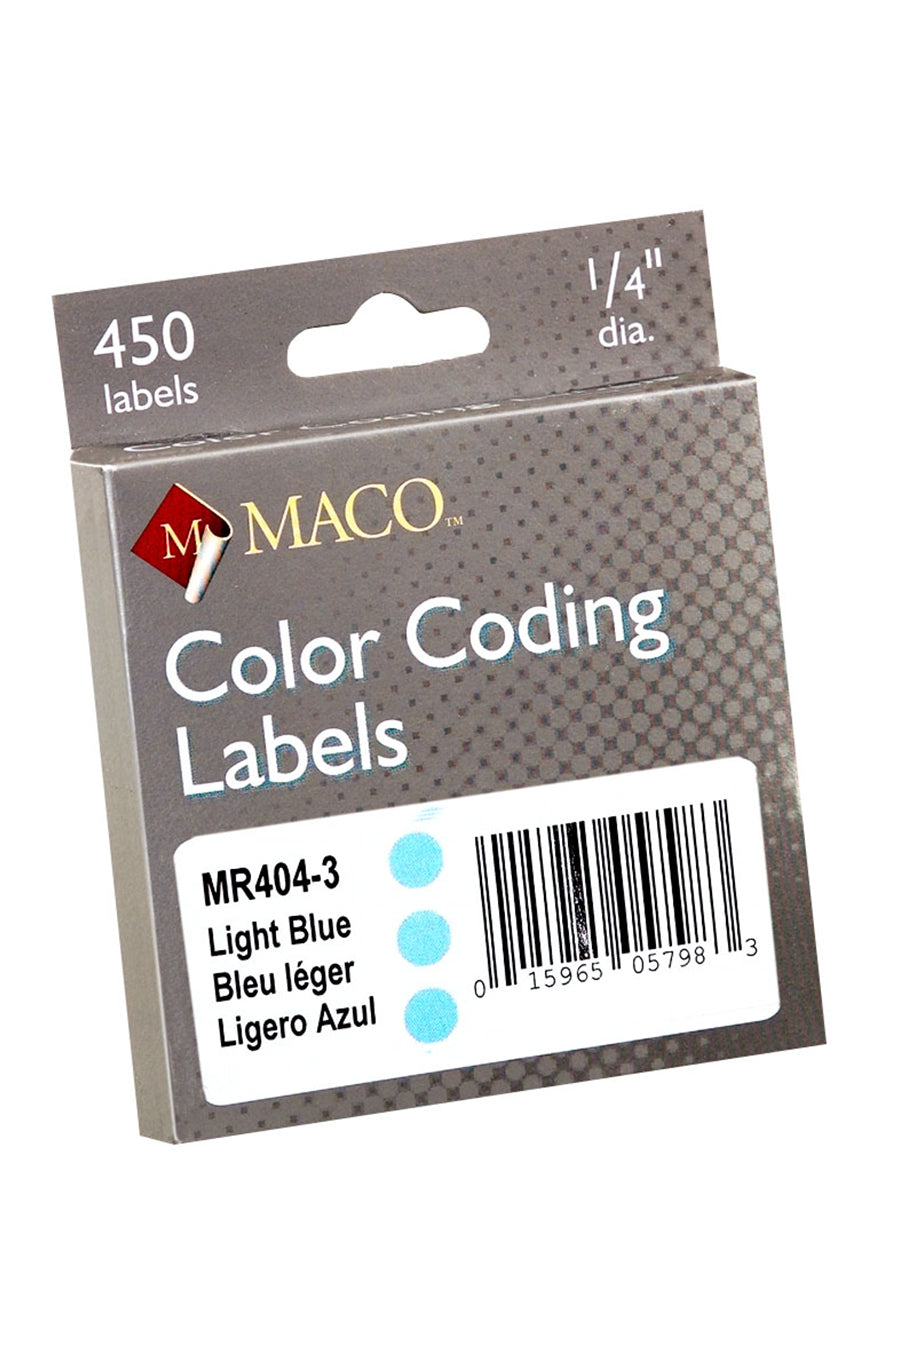 1/4" Dia. Color Coding Labels, Light Blue, 450/On Roll in Dispenser Box